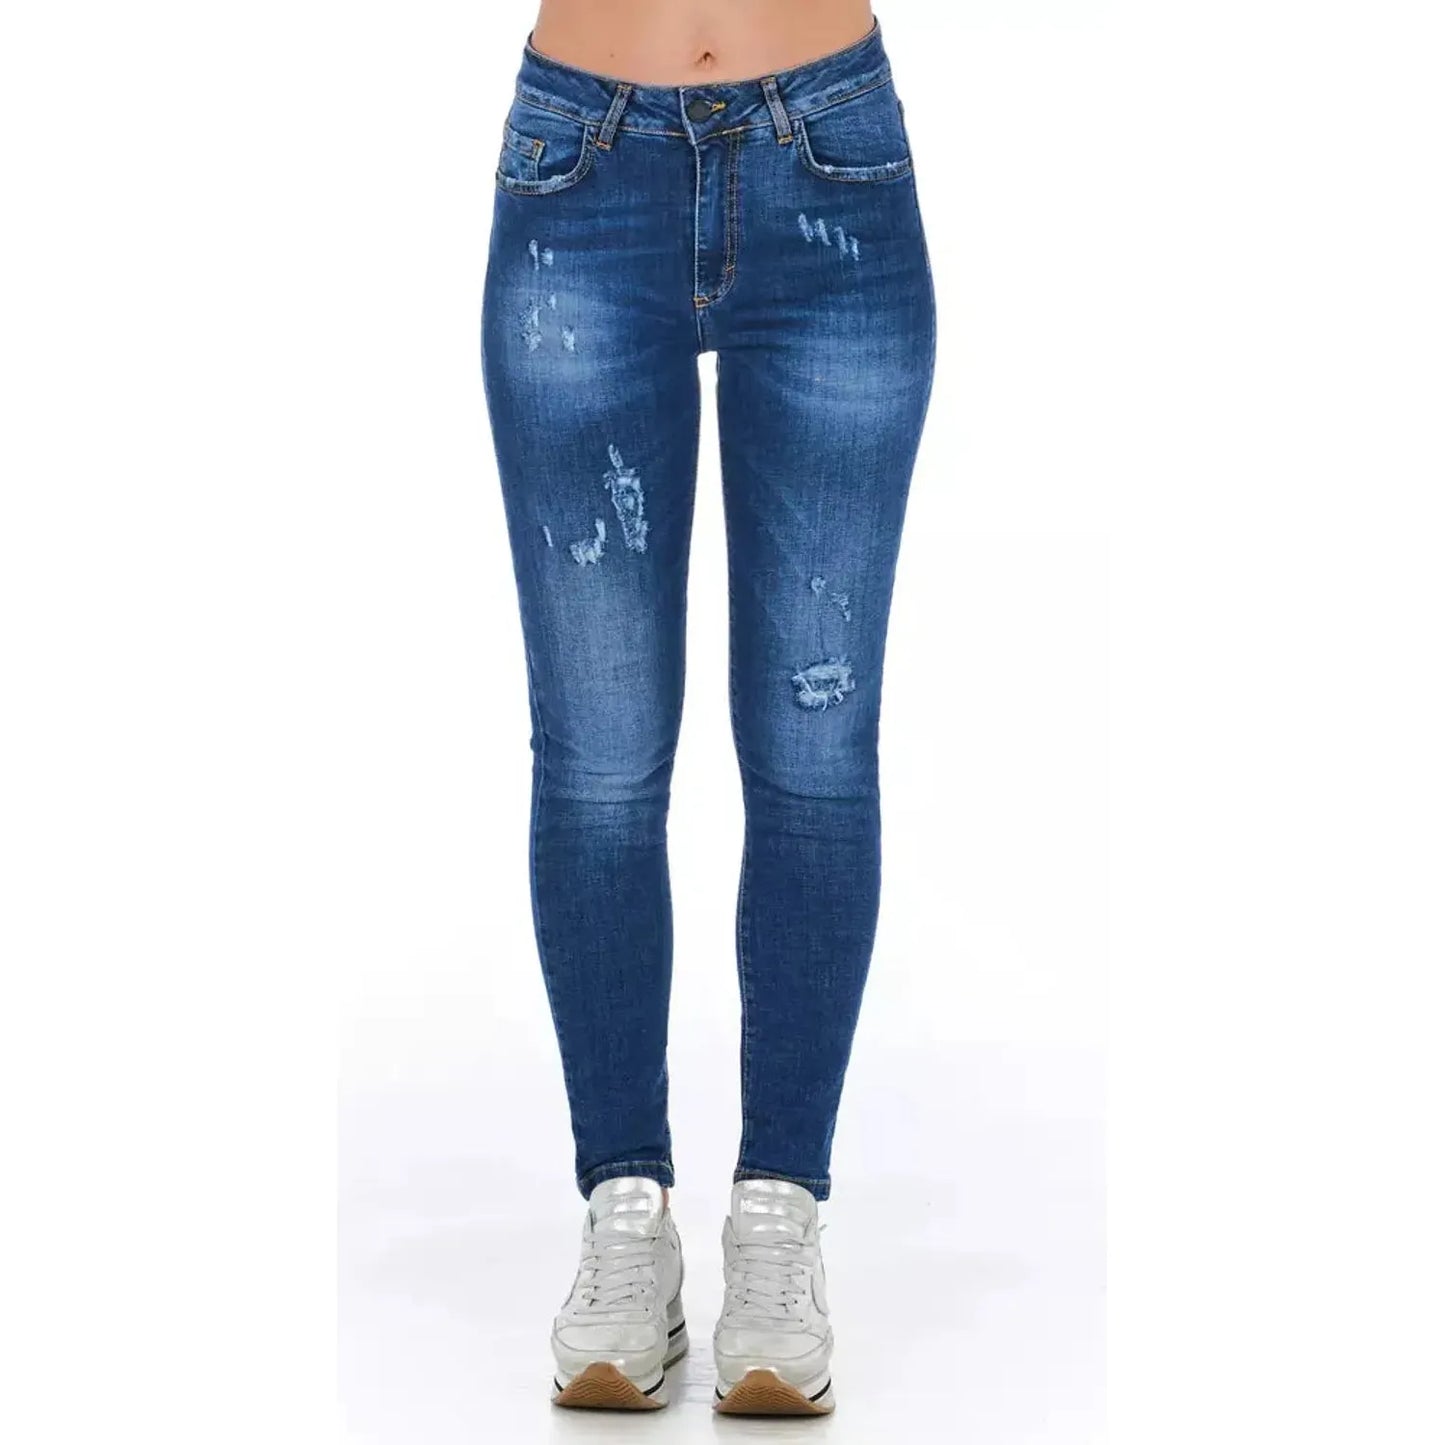 Frankie Morello Chic Worn Wash Denim Jeans for Sophisticated Style blue-jeans-pant-5 stock_product_image_21771_712878035-36-a5531bfc-ea0.webp